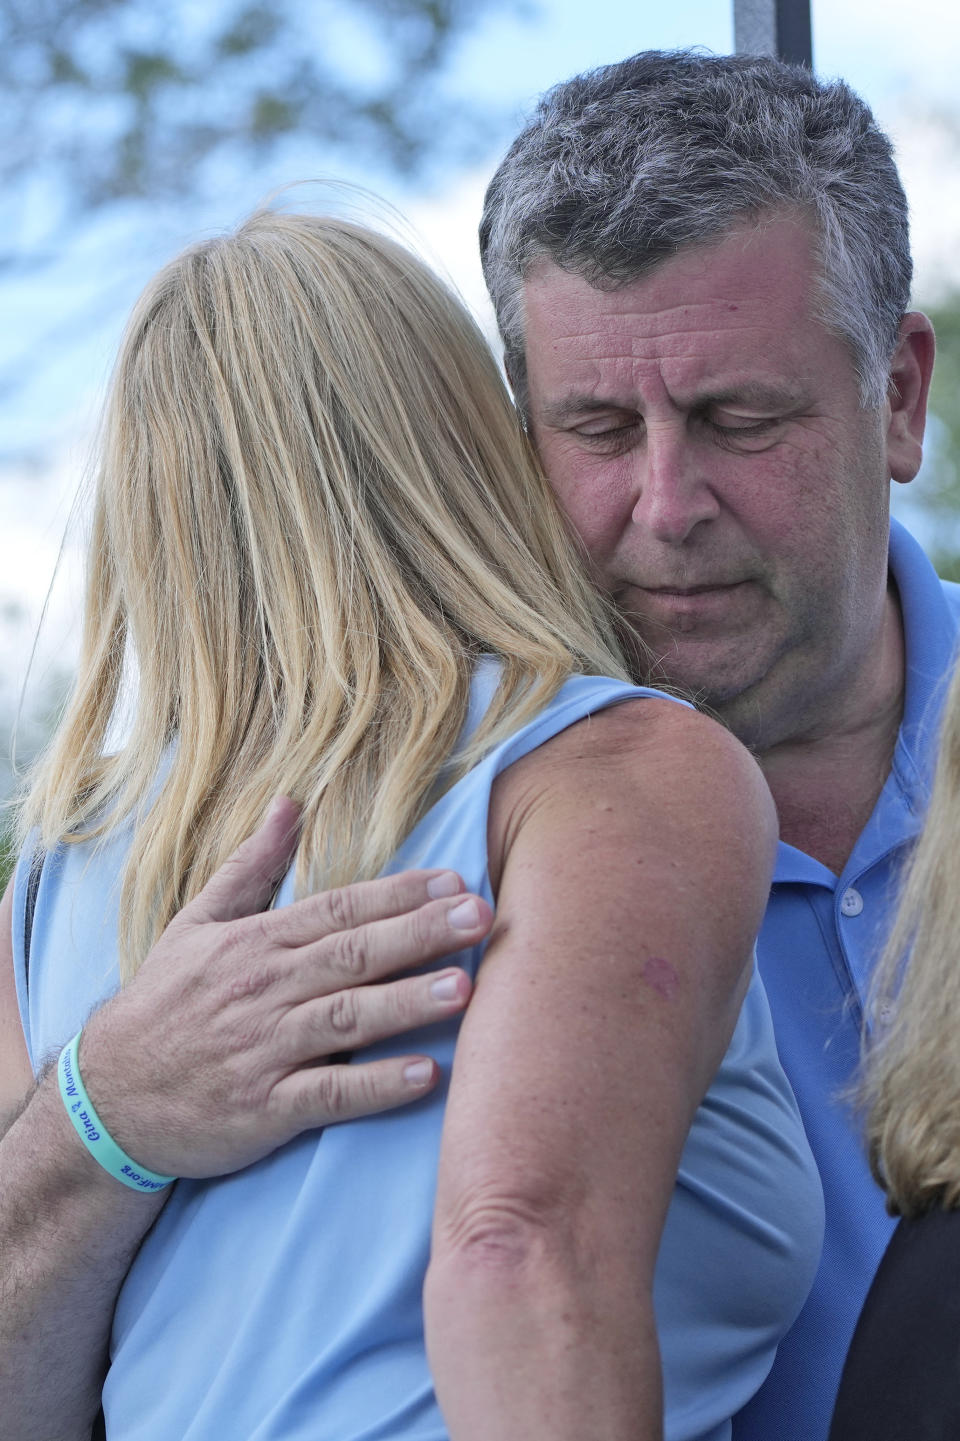 Annika Dworet, left, mother of shooting victim Nicholas Dworet and Tony Montalto, right, father of shooting victim Gina Montalto, hug, Tuesday, Feb. 14, 2023, at a ceremony in Coral Springs, Fla., honoring the lives of the 17 students and staff of Marjory Stoneman Douglas High School that were killed on Valentine's Day, 2018. (AP Photo/Wilfredo Lee)